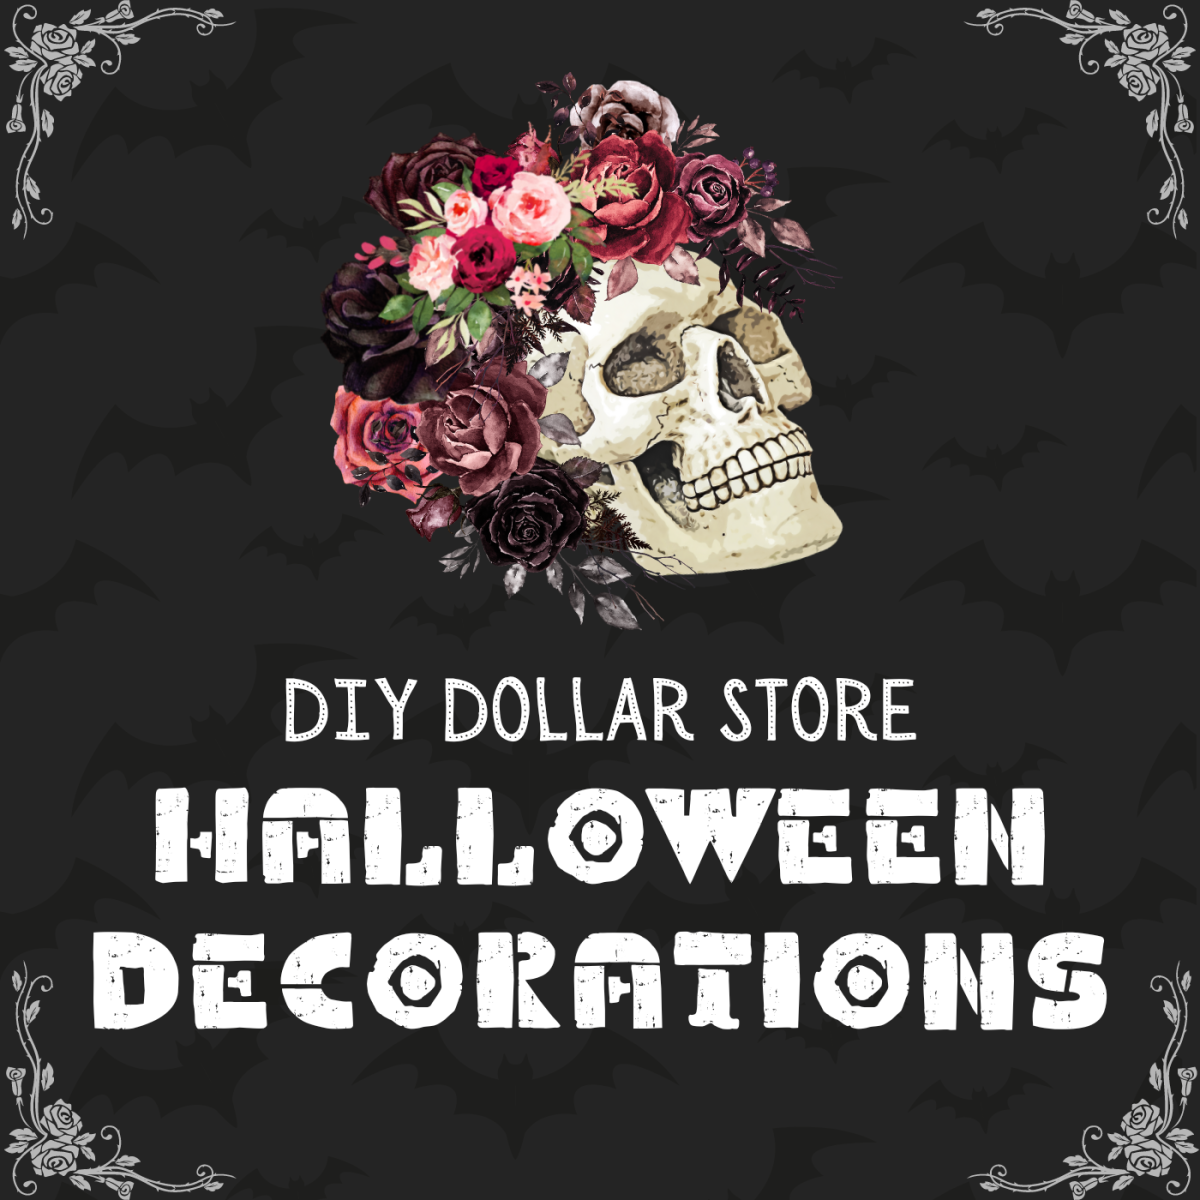 Learn how to create a skull with a rose crown and other gorgeous DIY Halloween decorations, all using supplies from the dollar store!